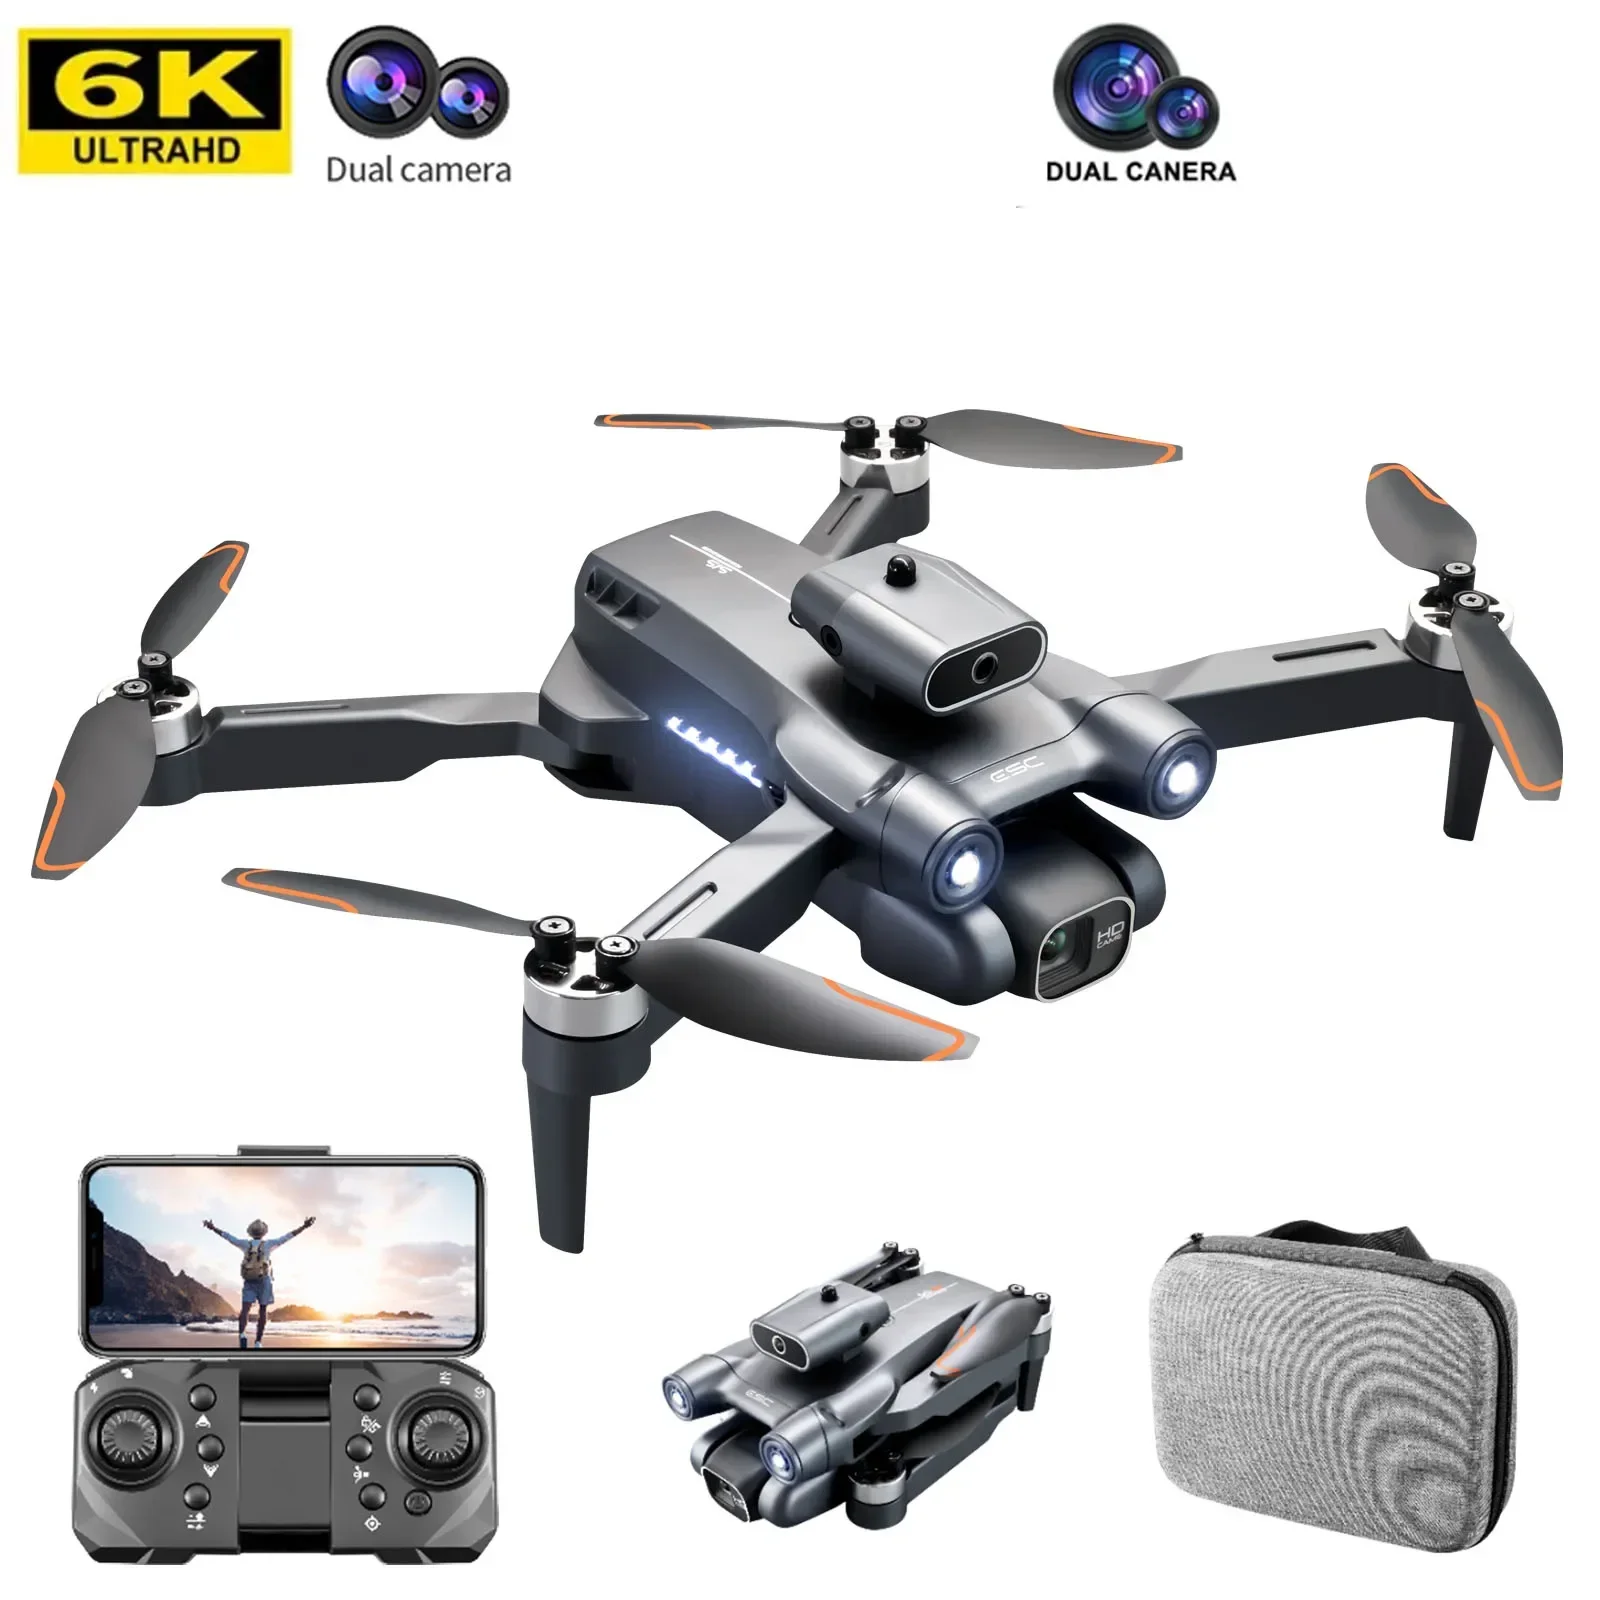 

XMSJ Drone 5G WiFi FPV 6K HD Dual Camera 360° Laser Obstacle Avoidance Brushless Motor GPS Return RC Quadcopter Drone Toys